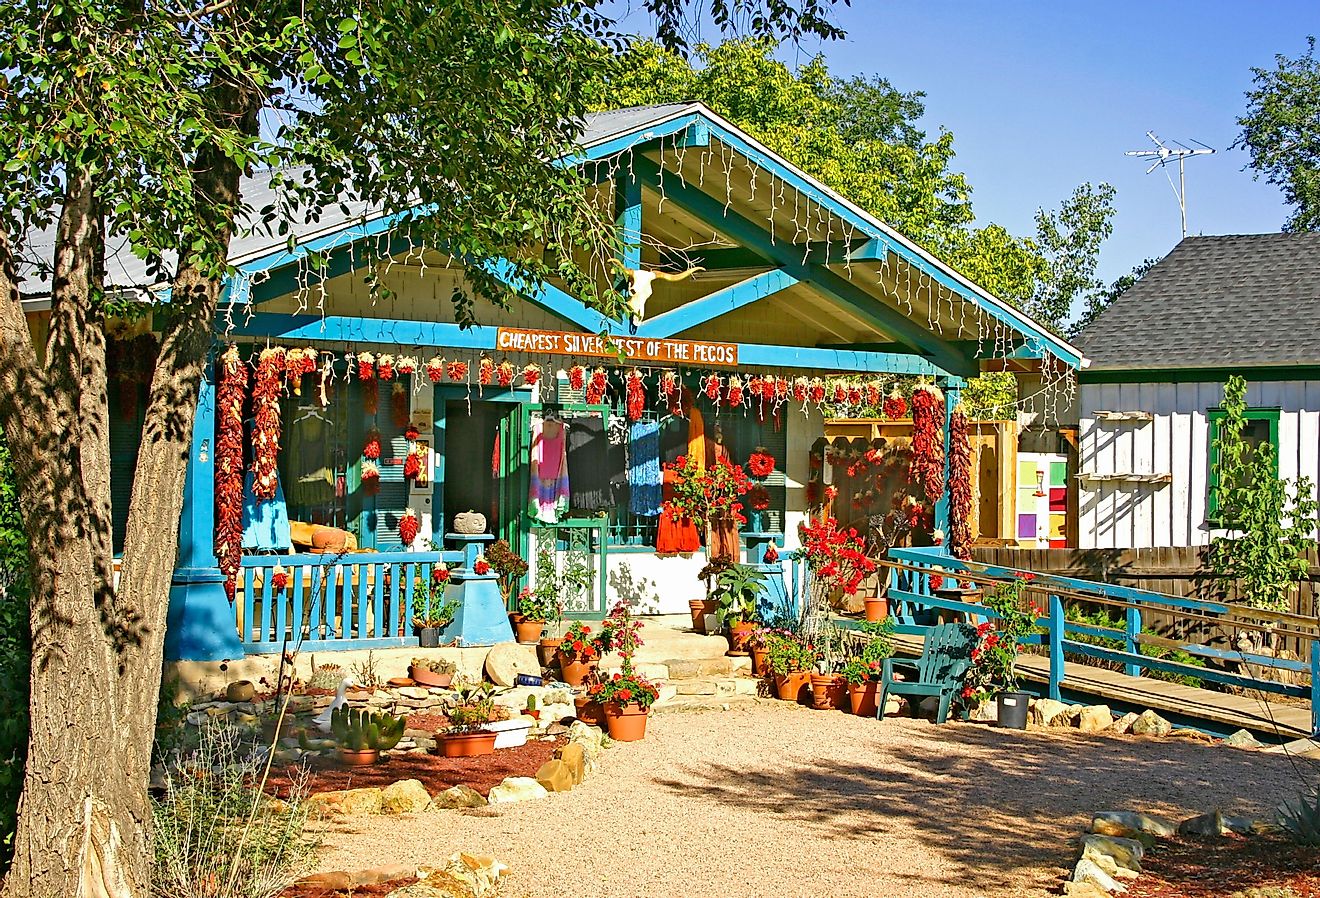 Image of a charming and colorful roadside shop in Madrid, New Mexico.